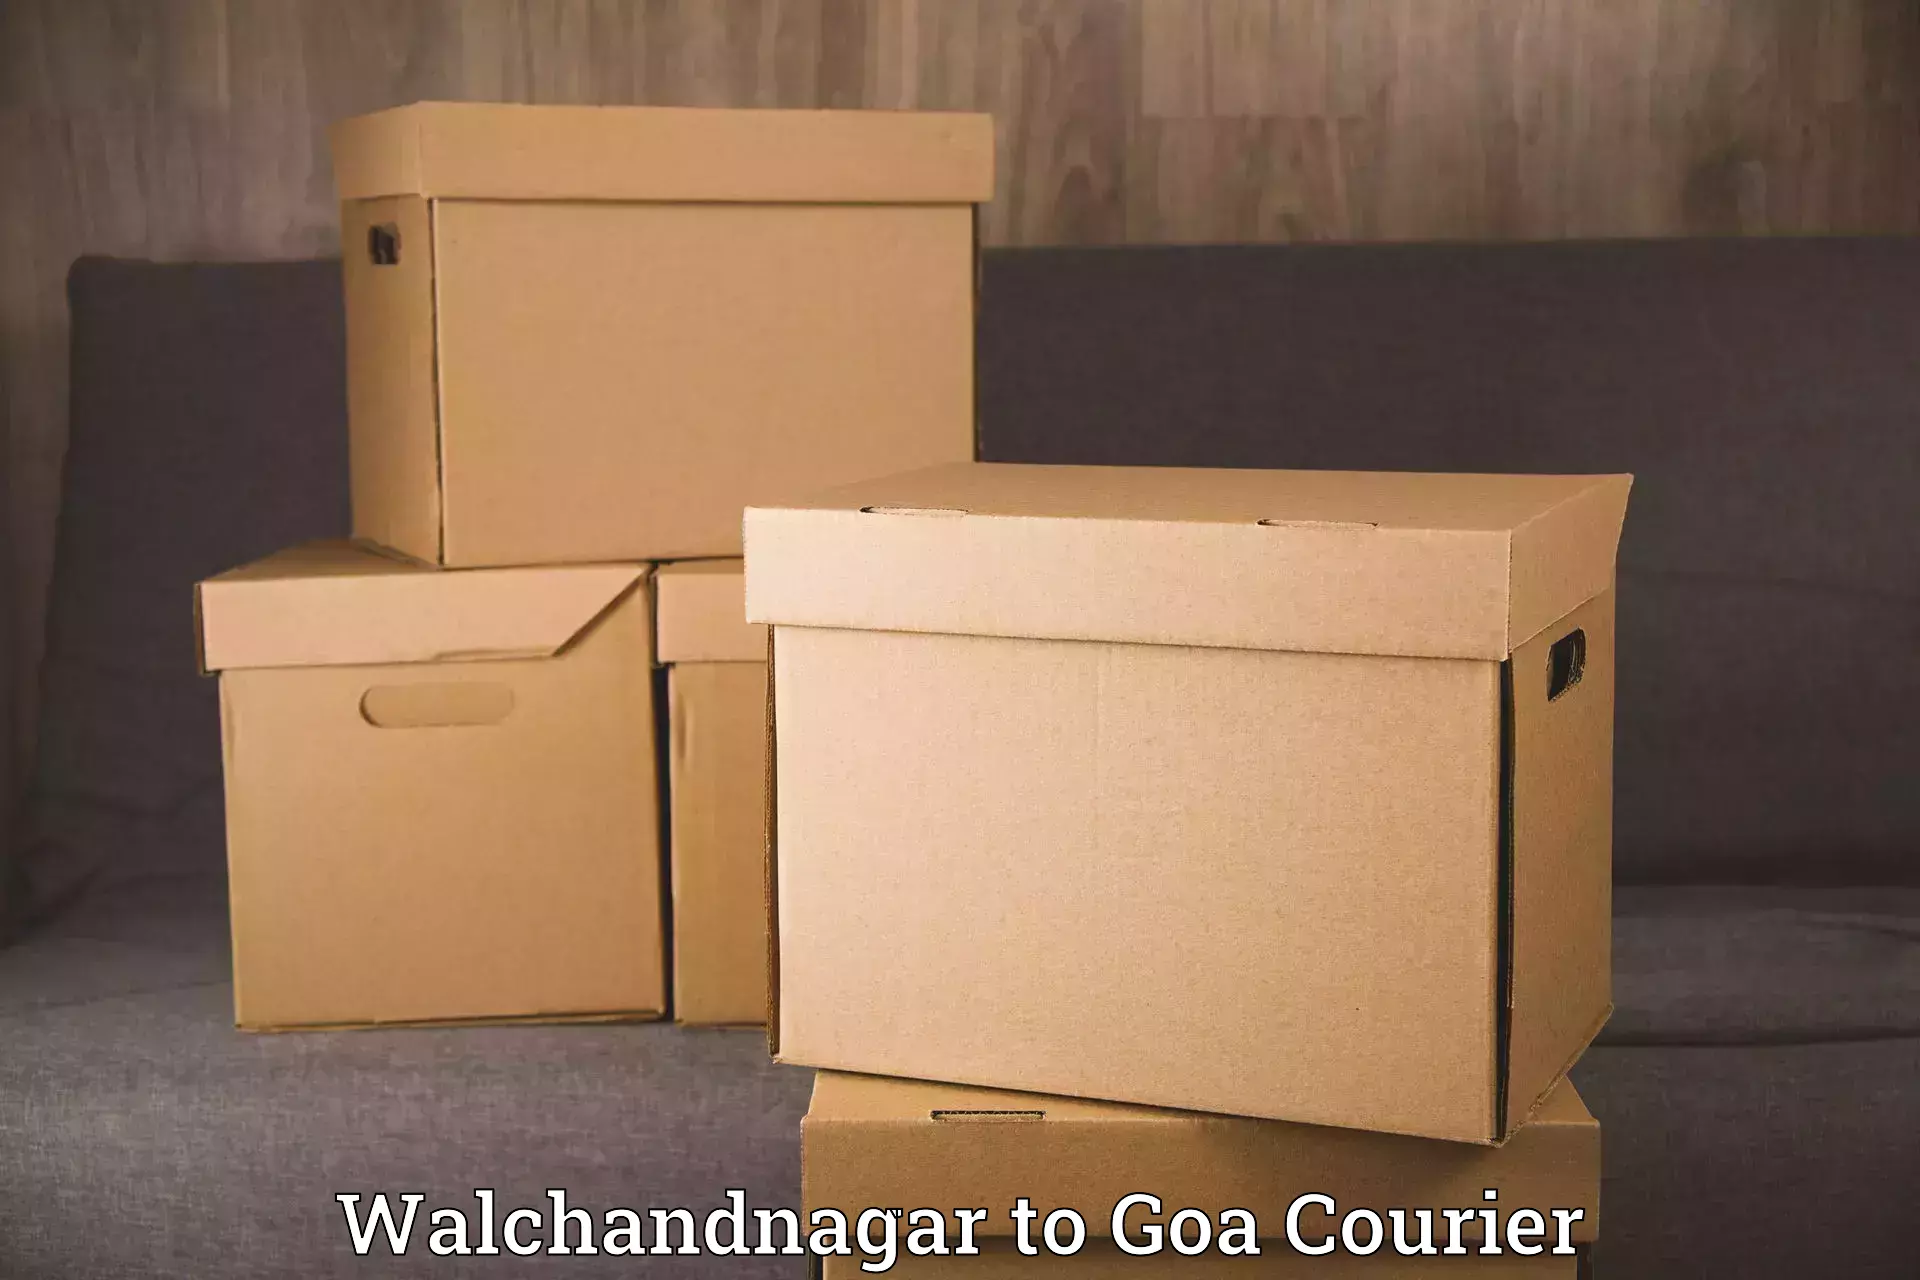 Trusted relocation experts Walchandnagar to Panjim